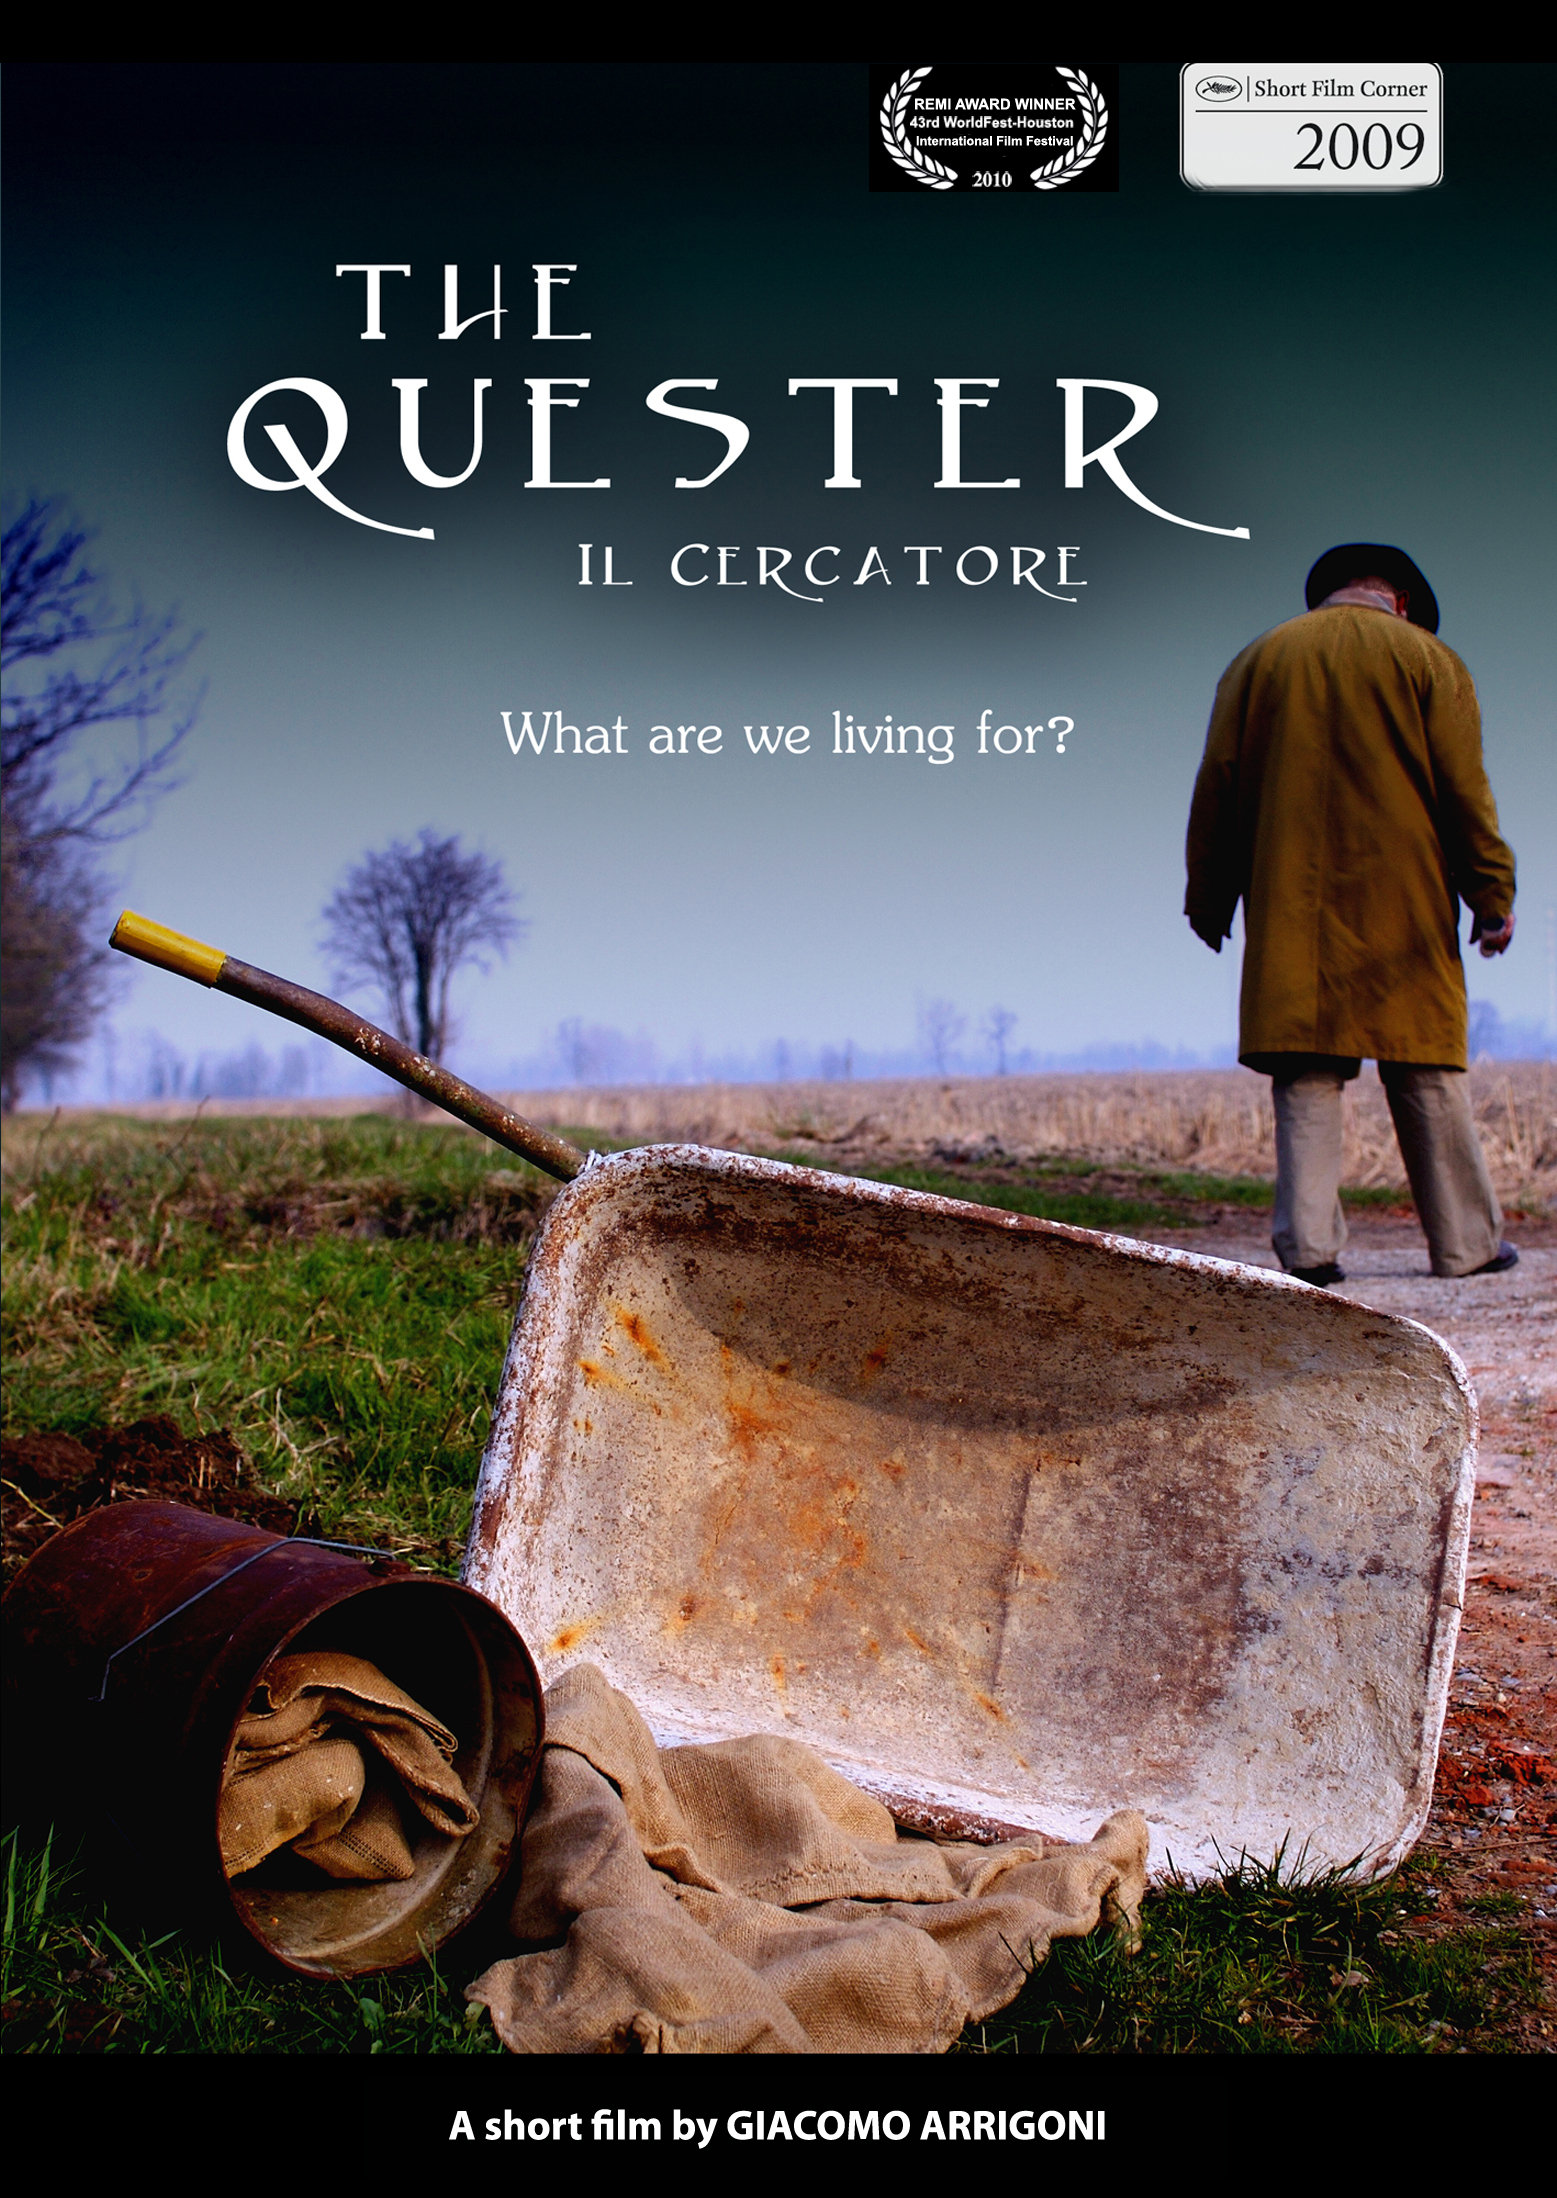 The Quester